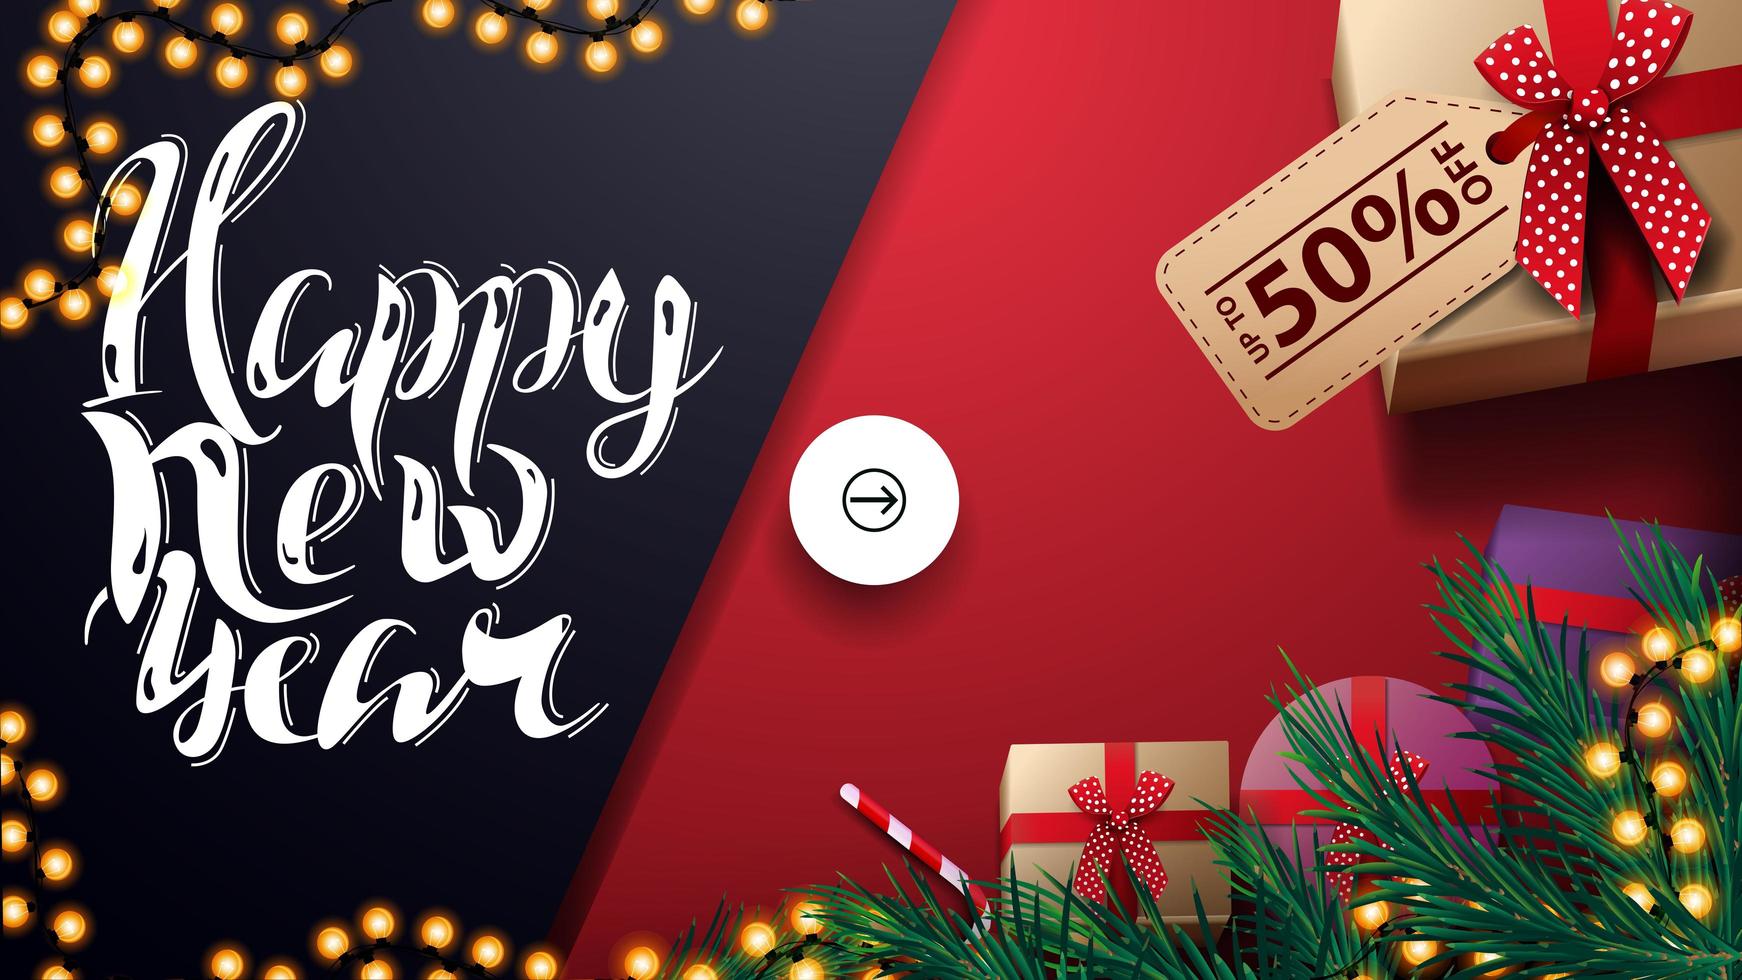 Happy New Year, up to 50 off, red and blue discount and greeting banner with presents, top view vector